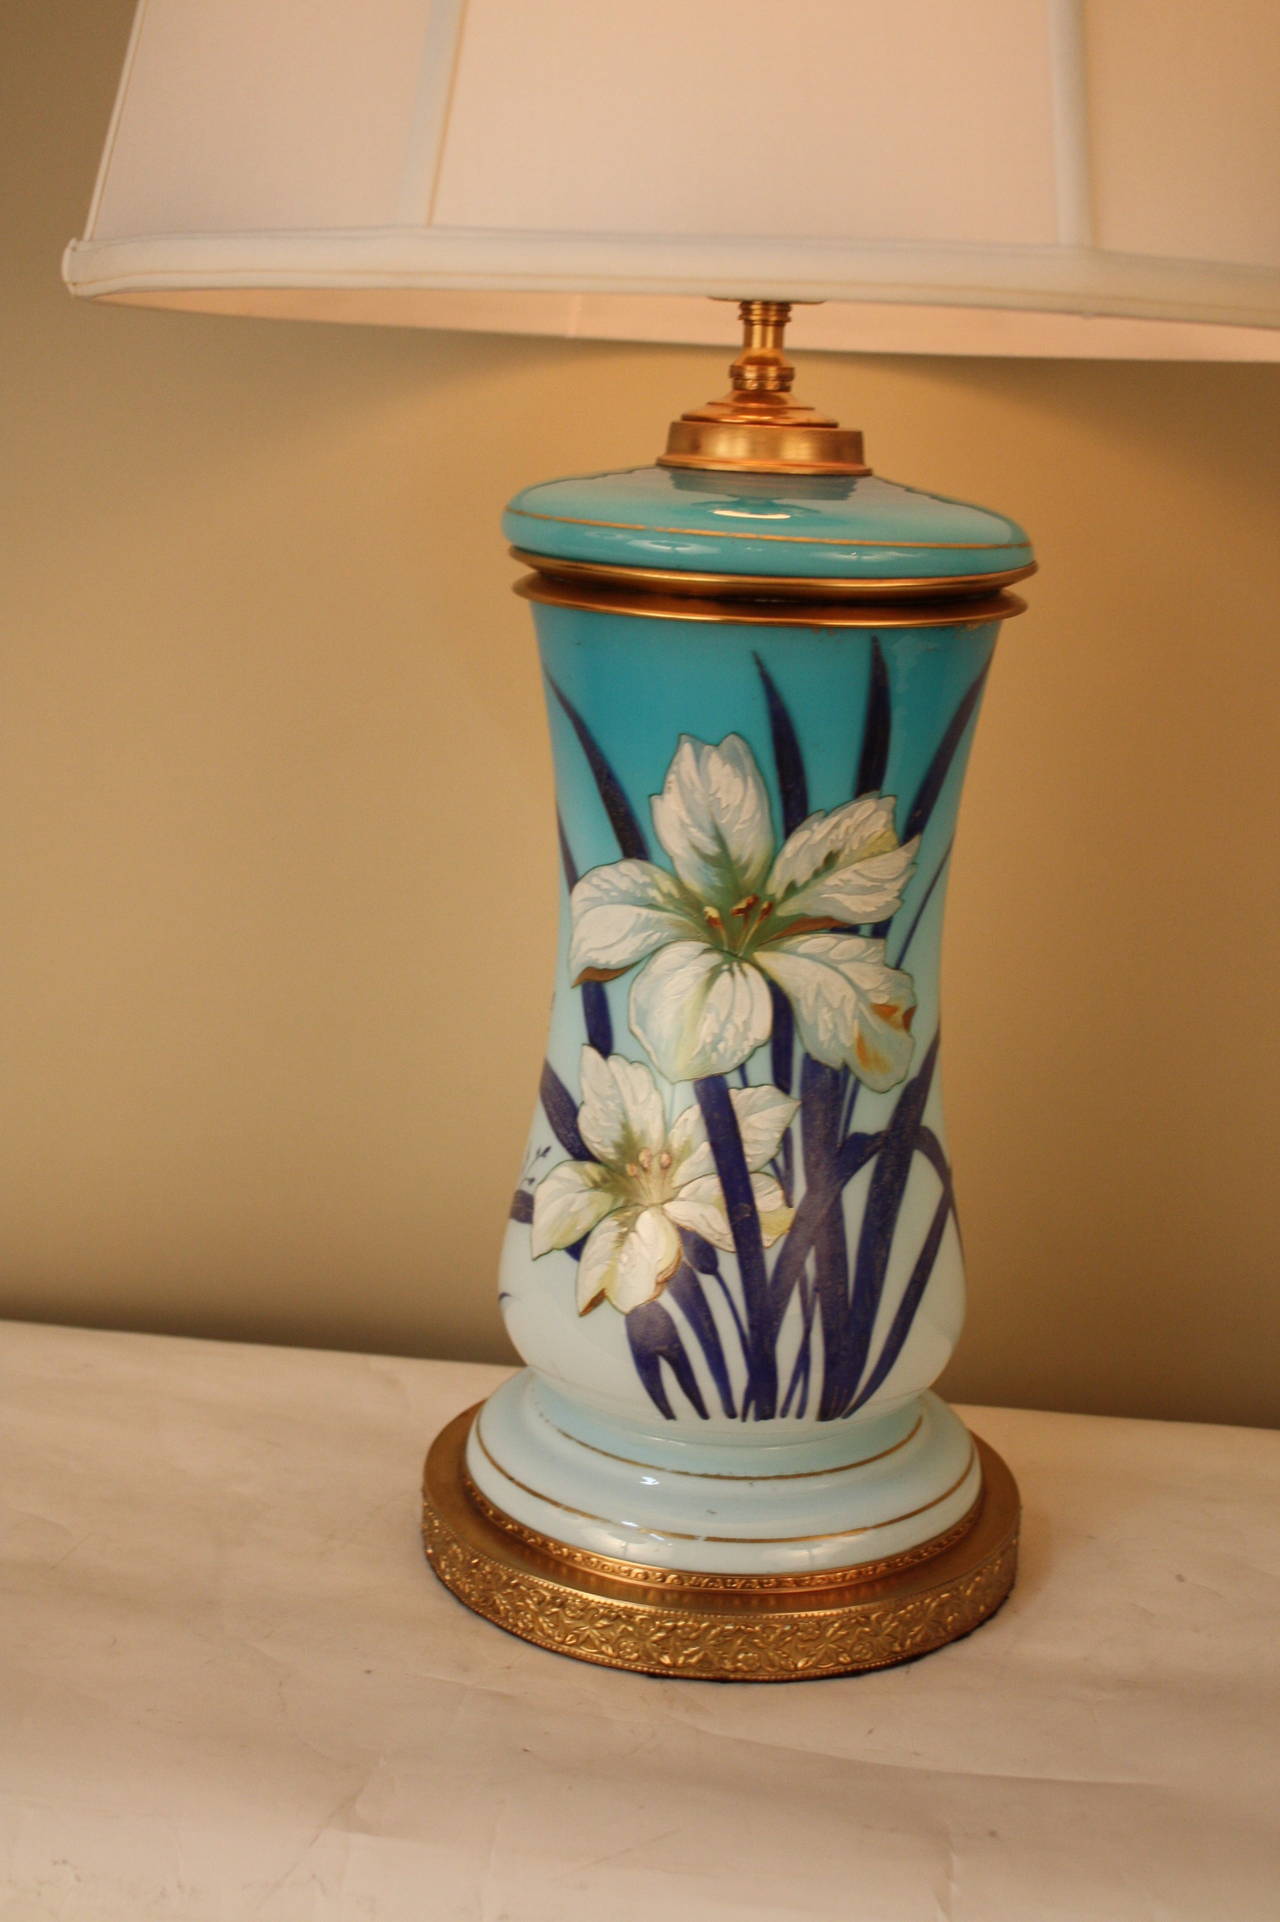 Charming electrified oil lamp in light blue French opaline glass featuring hand-painted lilies.